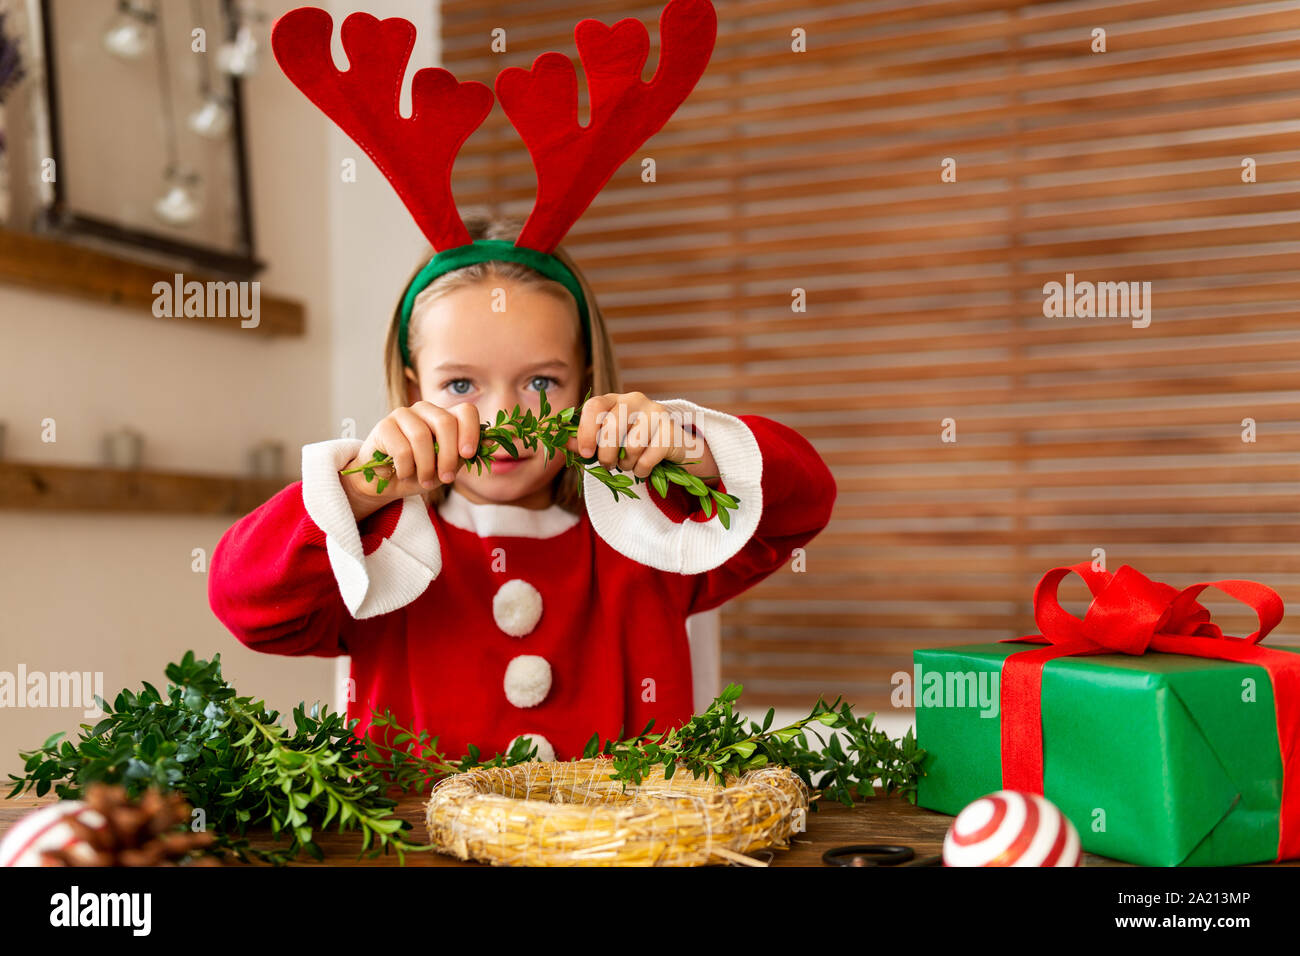 Cute preschooler girl dressed up for xmas making christmas wreath in living room. Christmas decoration family fun concept. Stock Photo